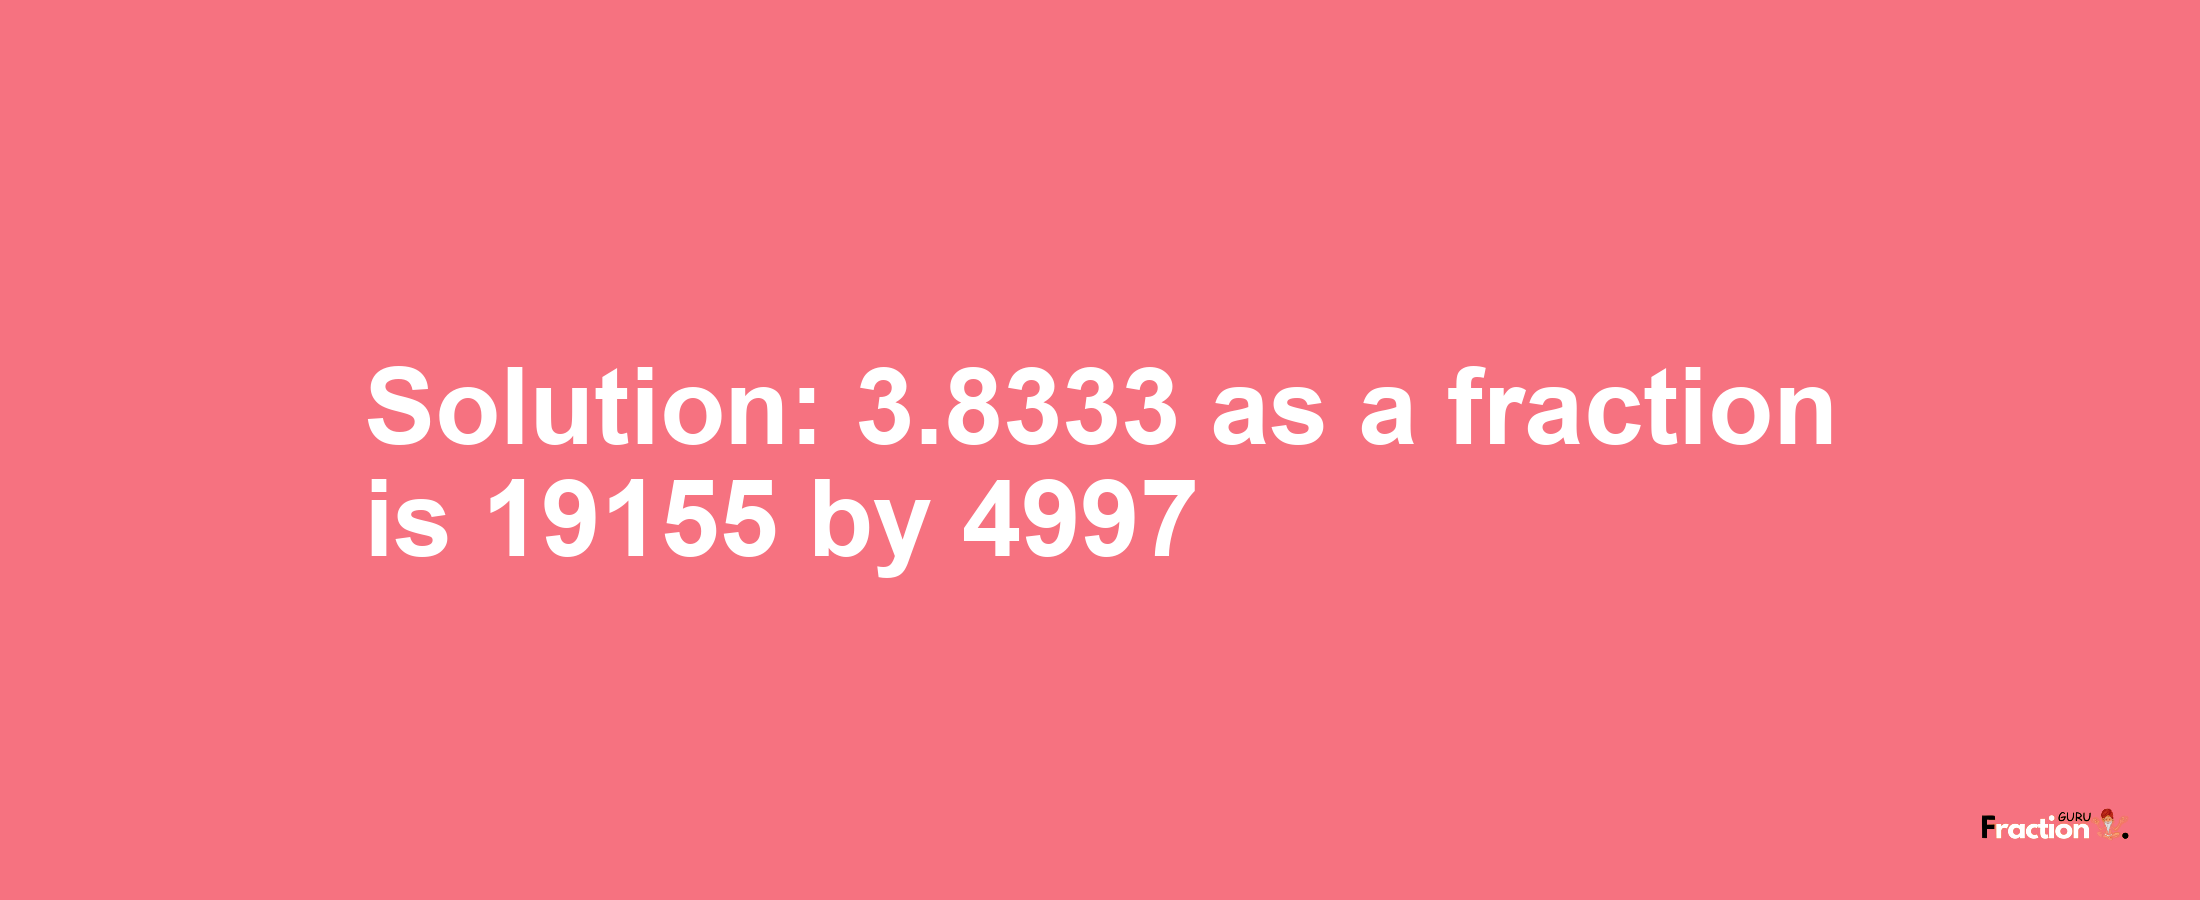 Solution:3.8333 as a fraction is 19155/4997